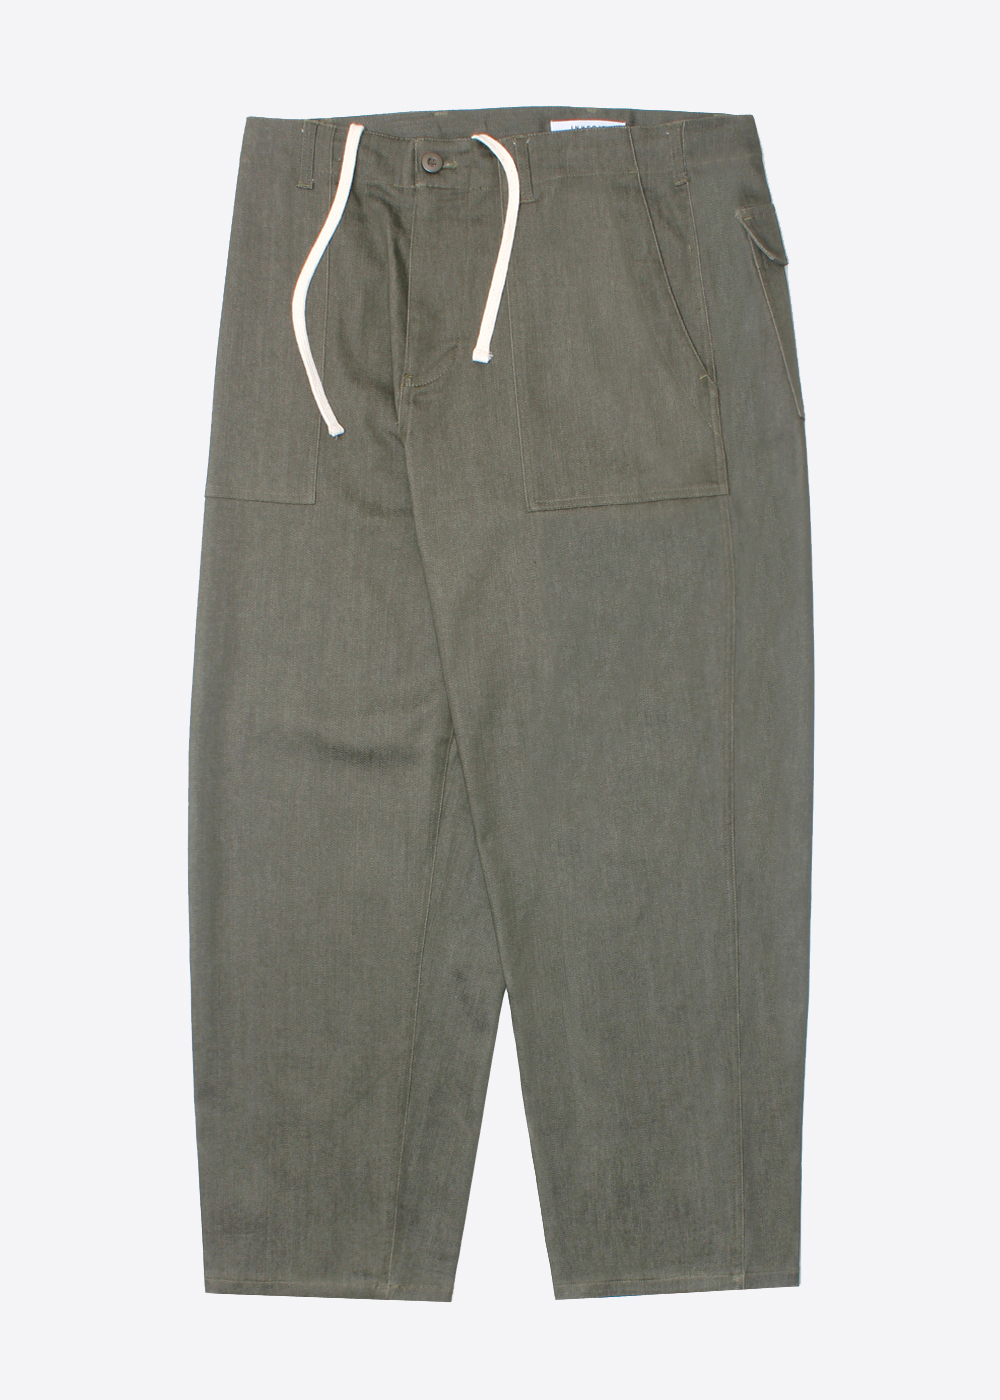 INHERIT BY JOURNAL STANDARD’loose straight fit’ patchwork fatigue pant